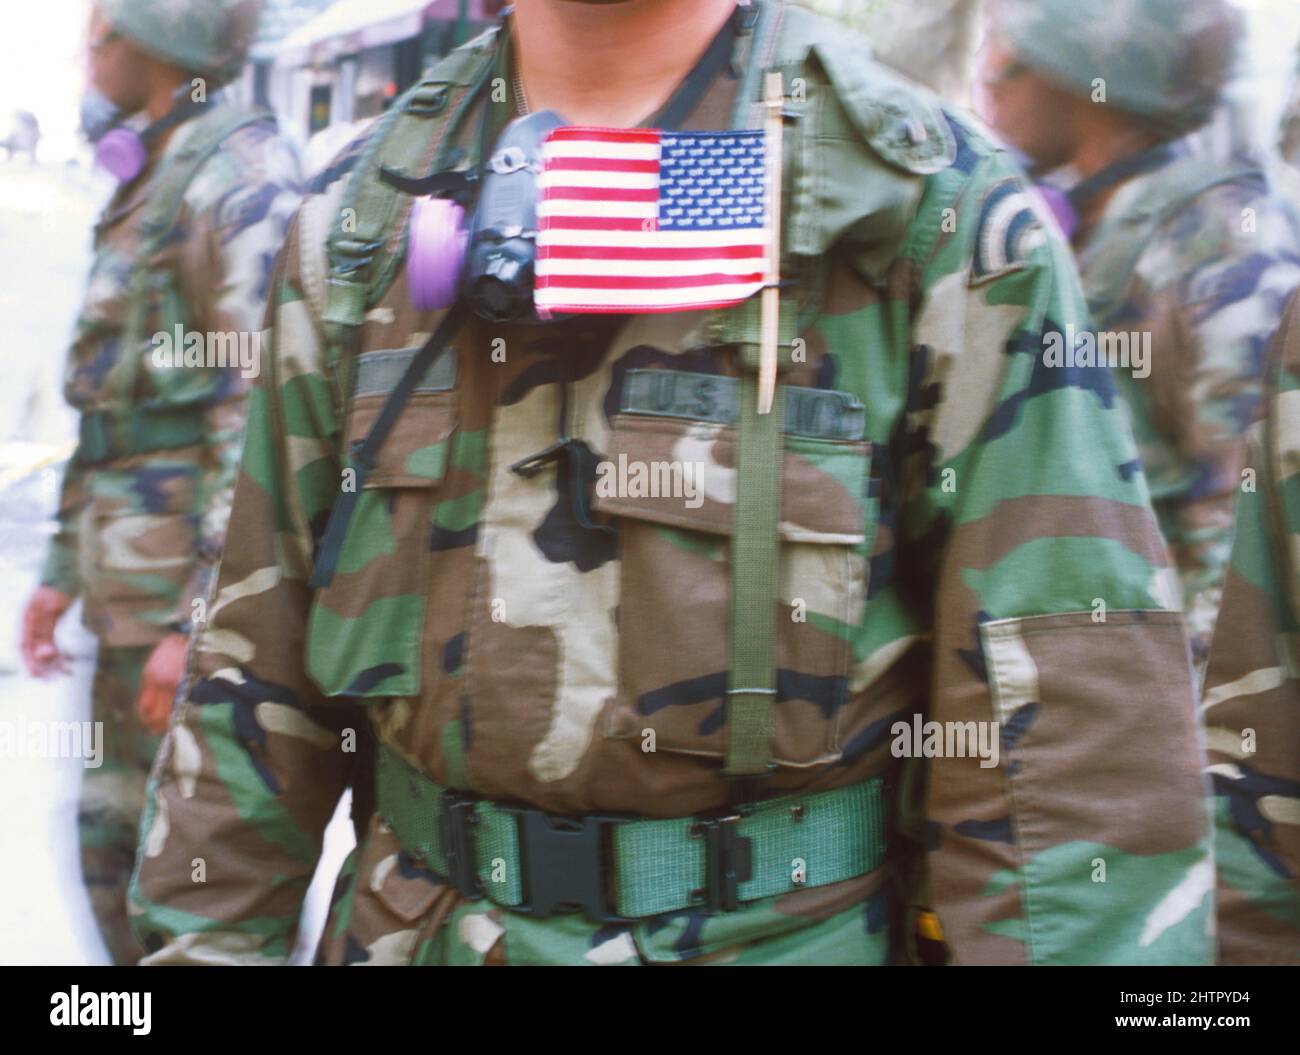 National guard.US military. National guardsman soldier with American flag in buttonhole. Men in combat gear or camouflage gear preparing for duty. USA Stock Photo